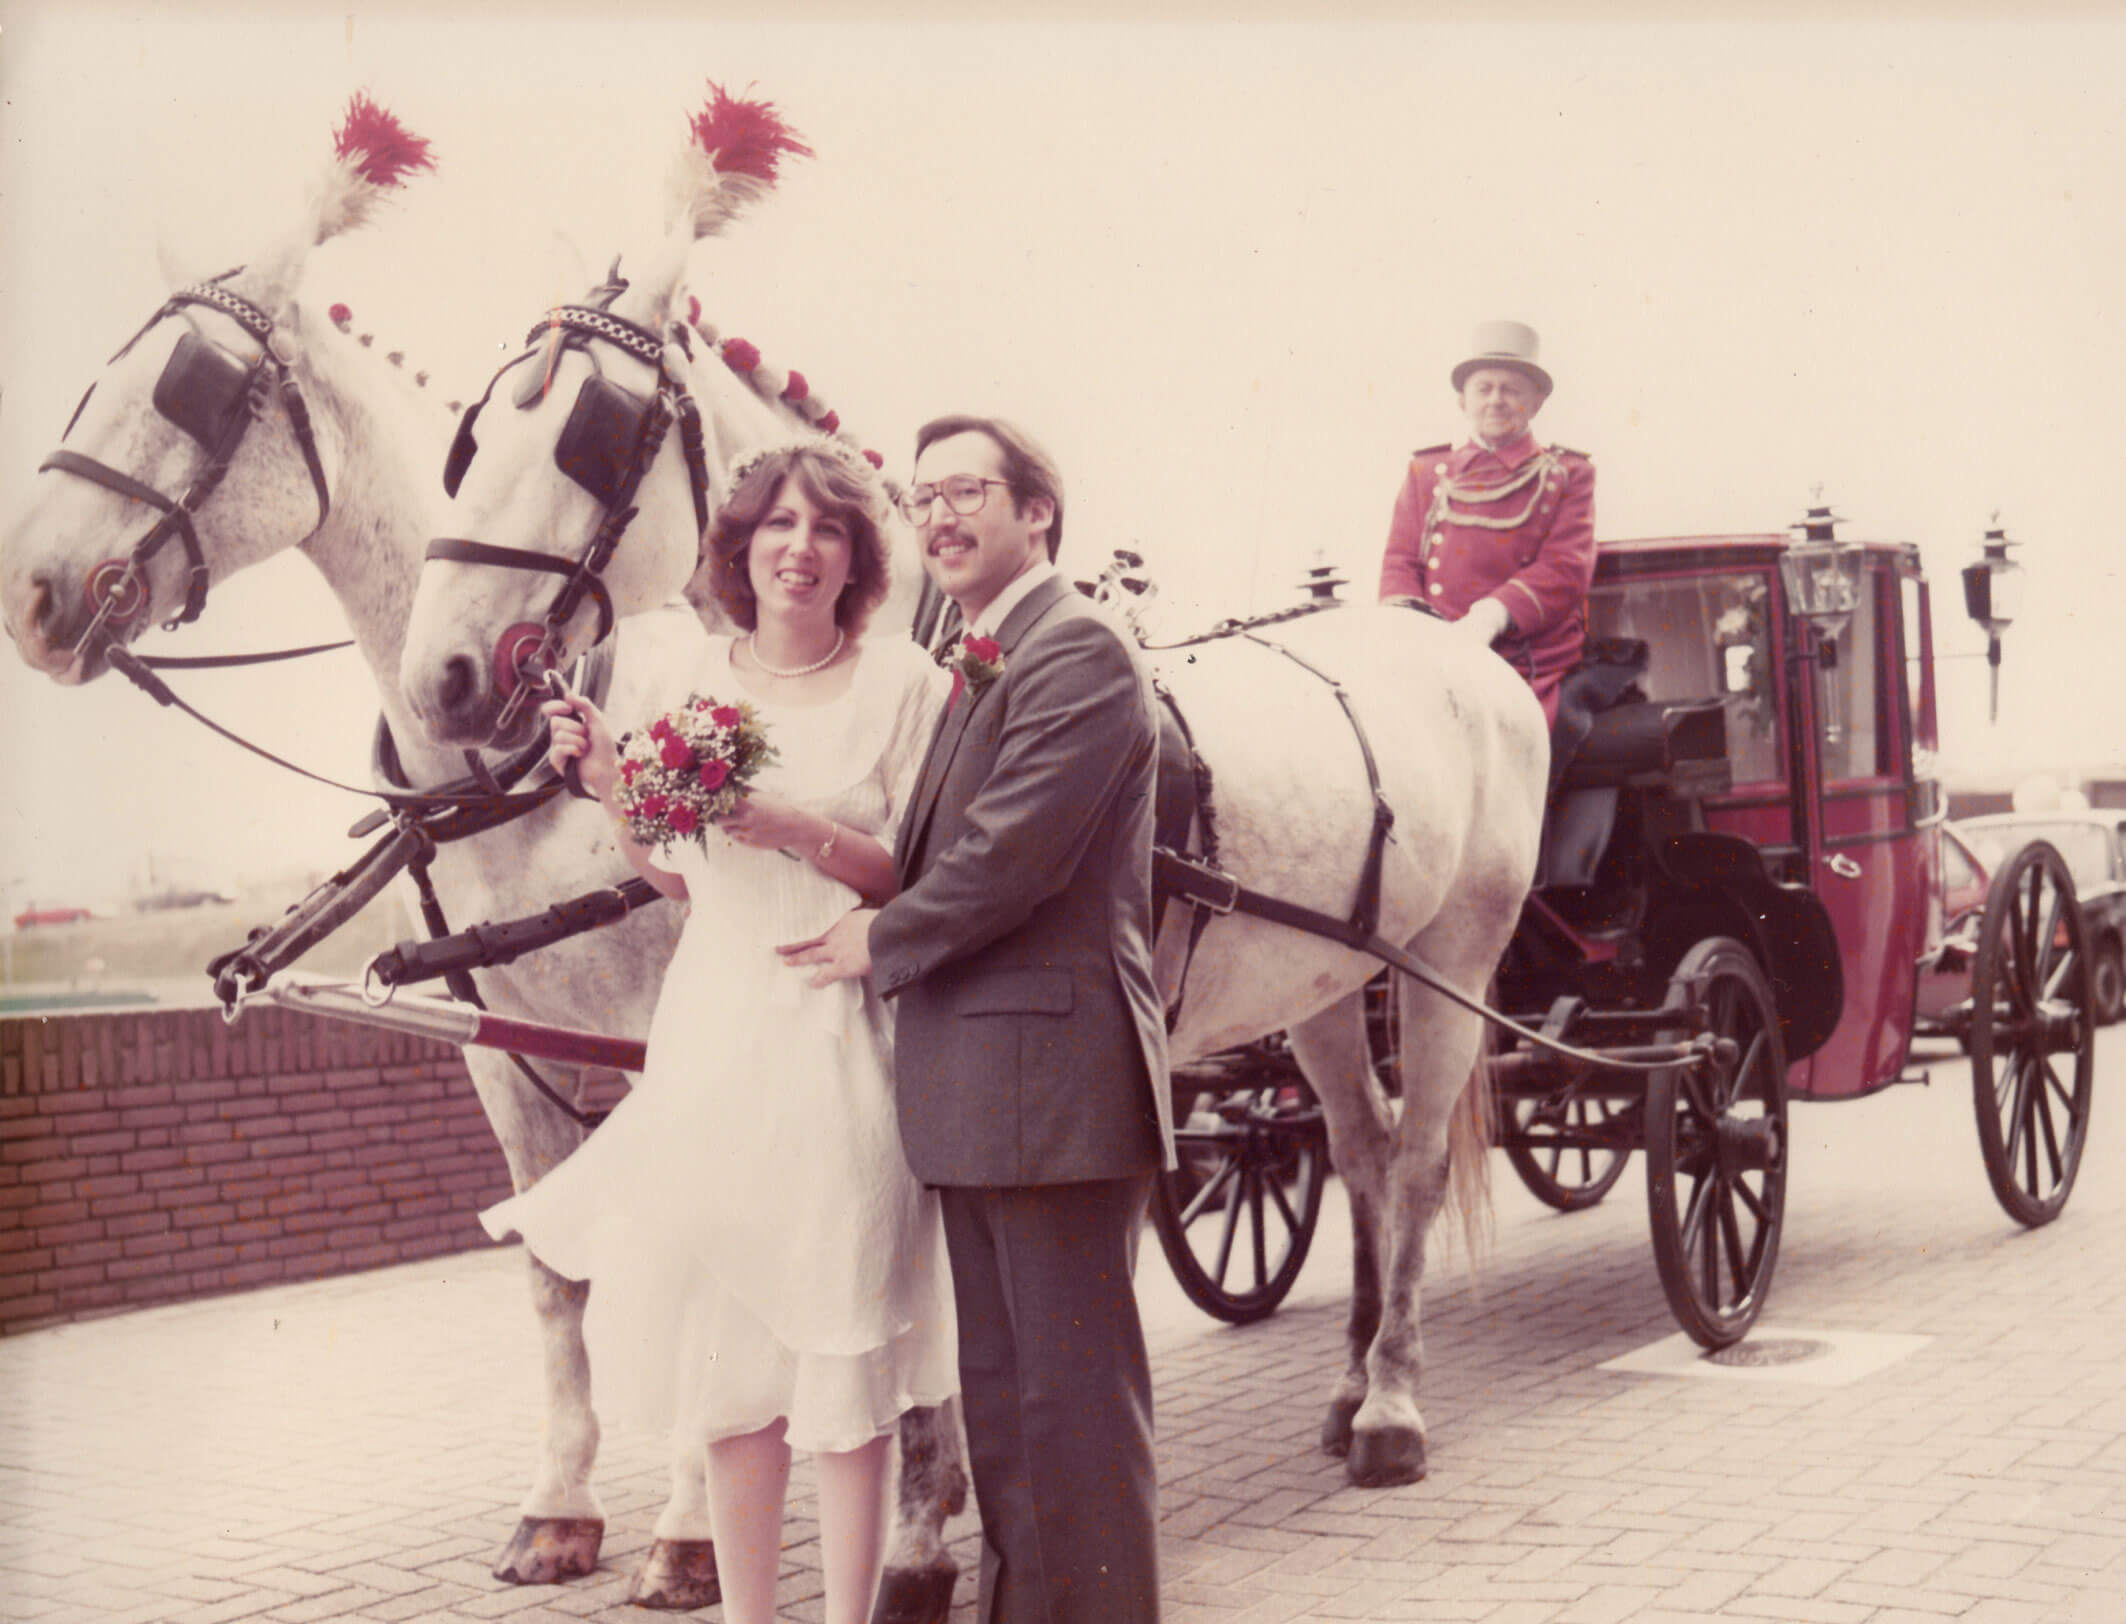 Susan and Mark Hembarsky posing in front of a red horse drawn carriage on their wedding day.